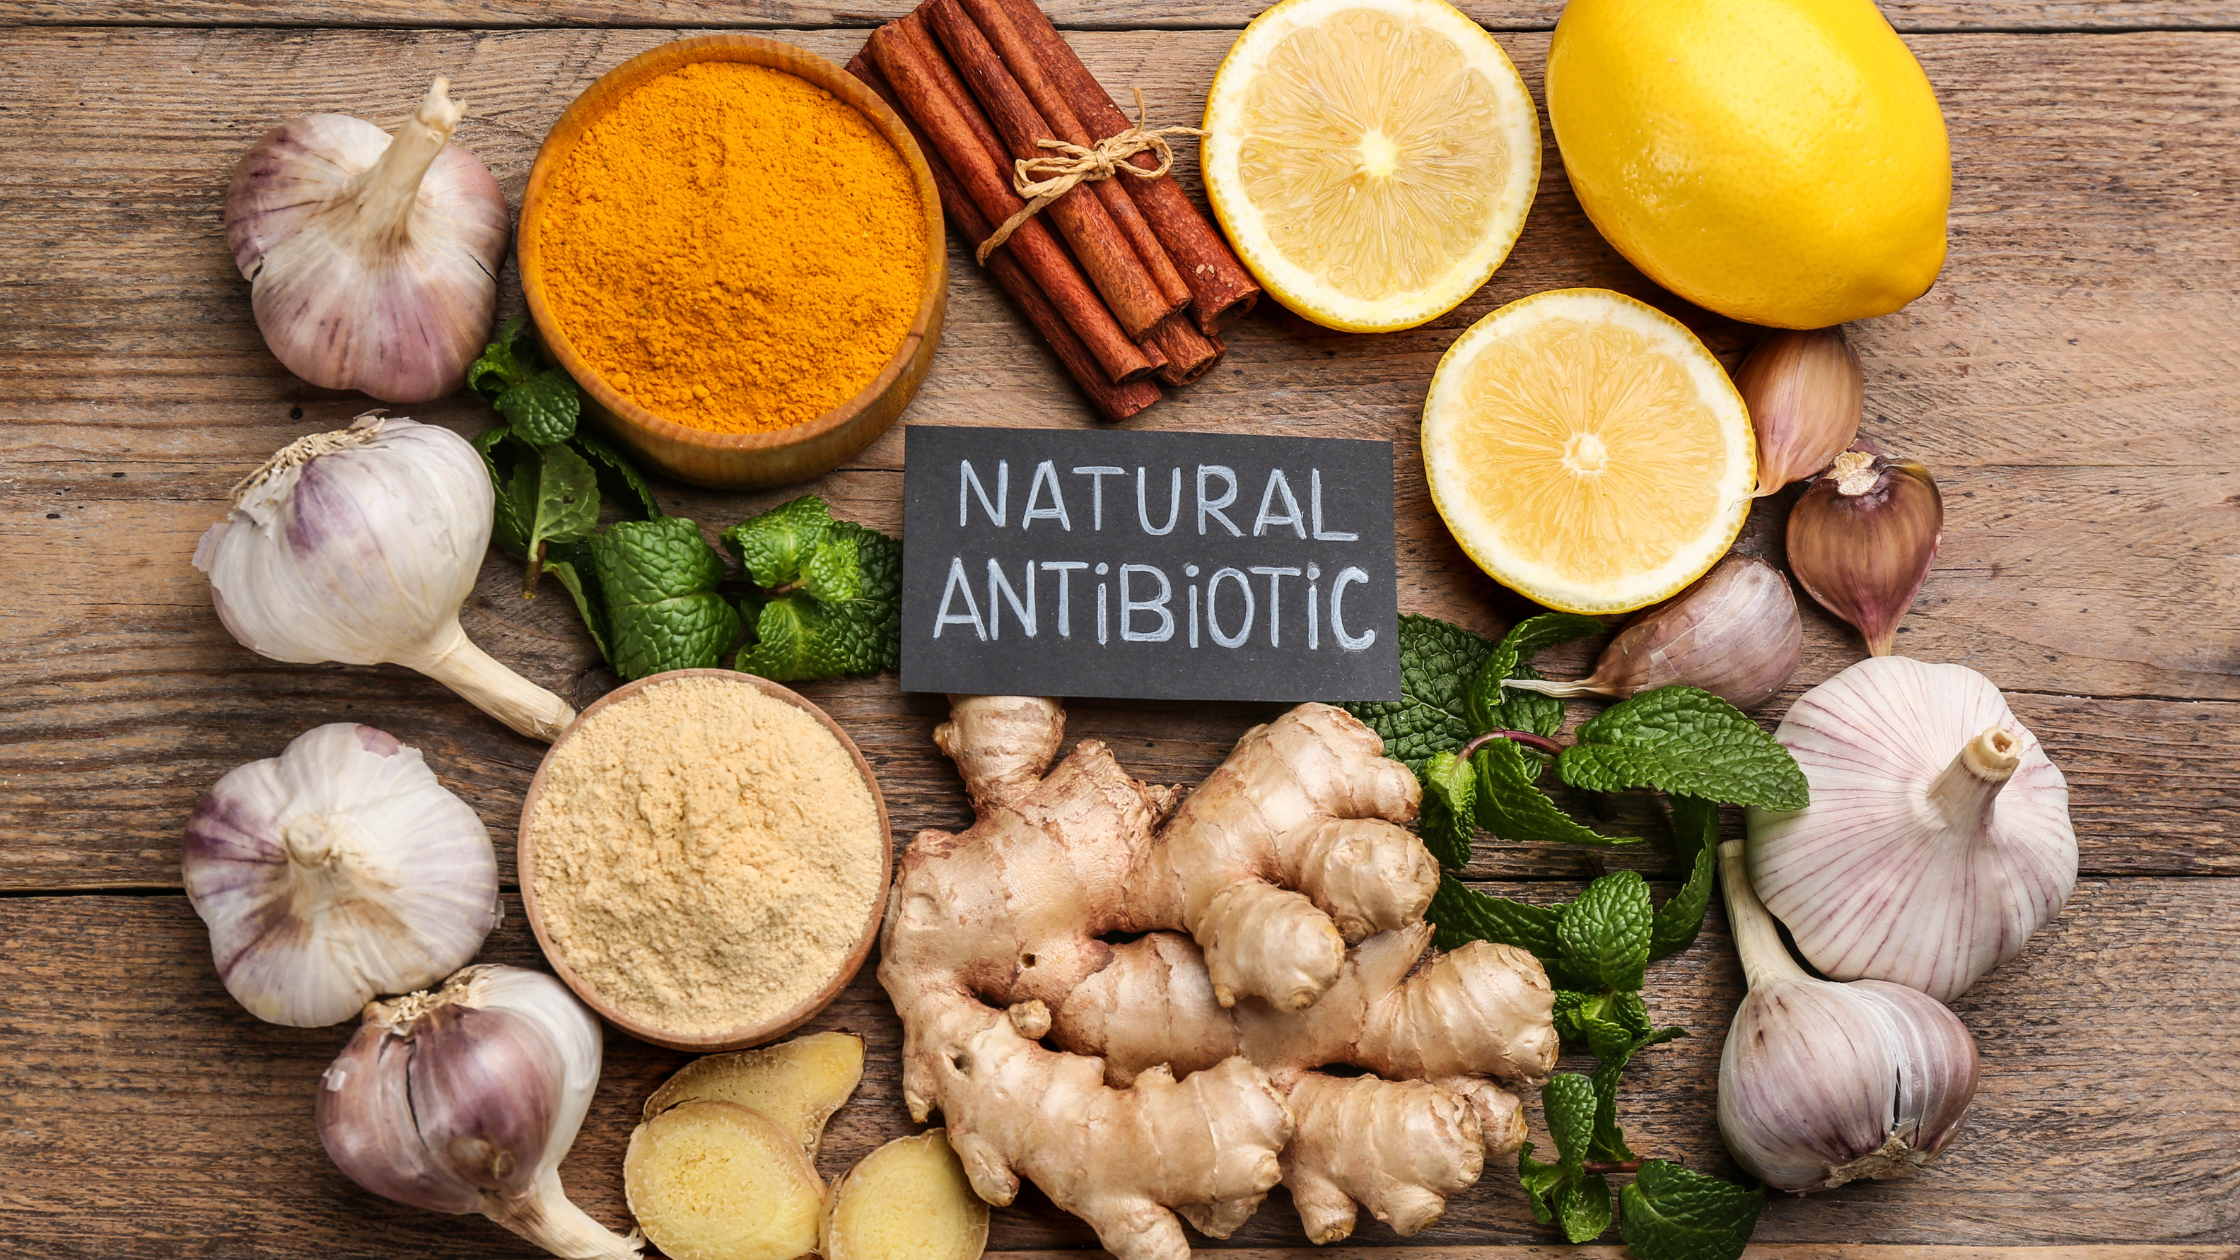 The Most Powerful Natural Antibiotic, Kills Any Infection In the Body